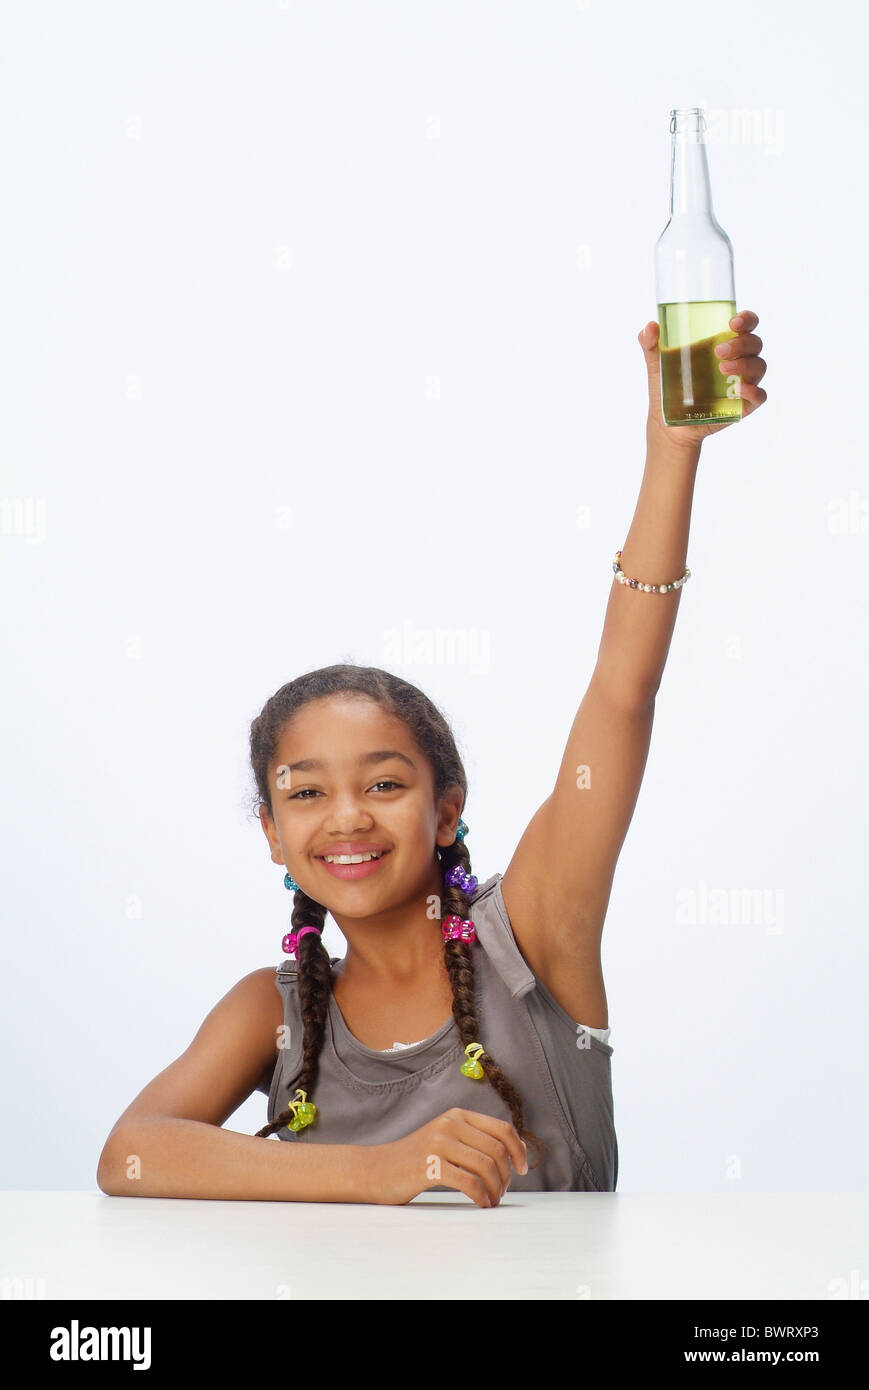 Portrait of a girl with a drink Stock Photo